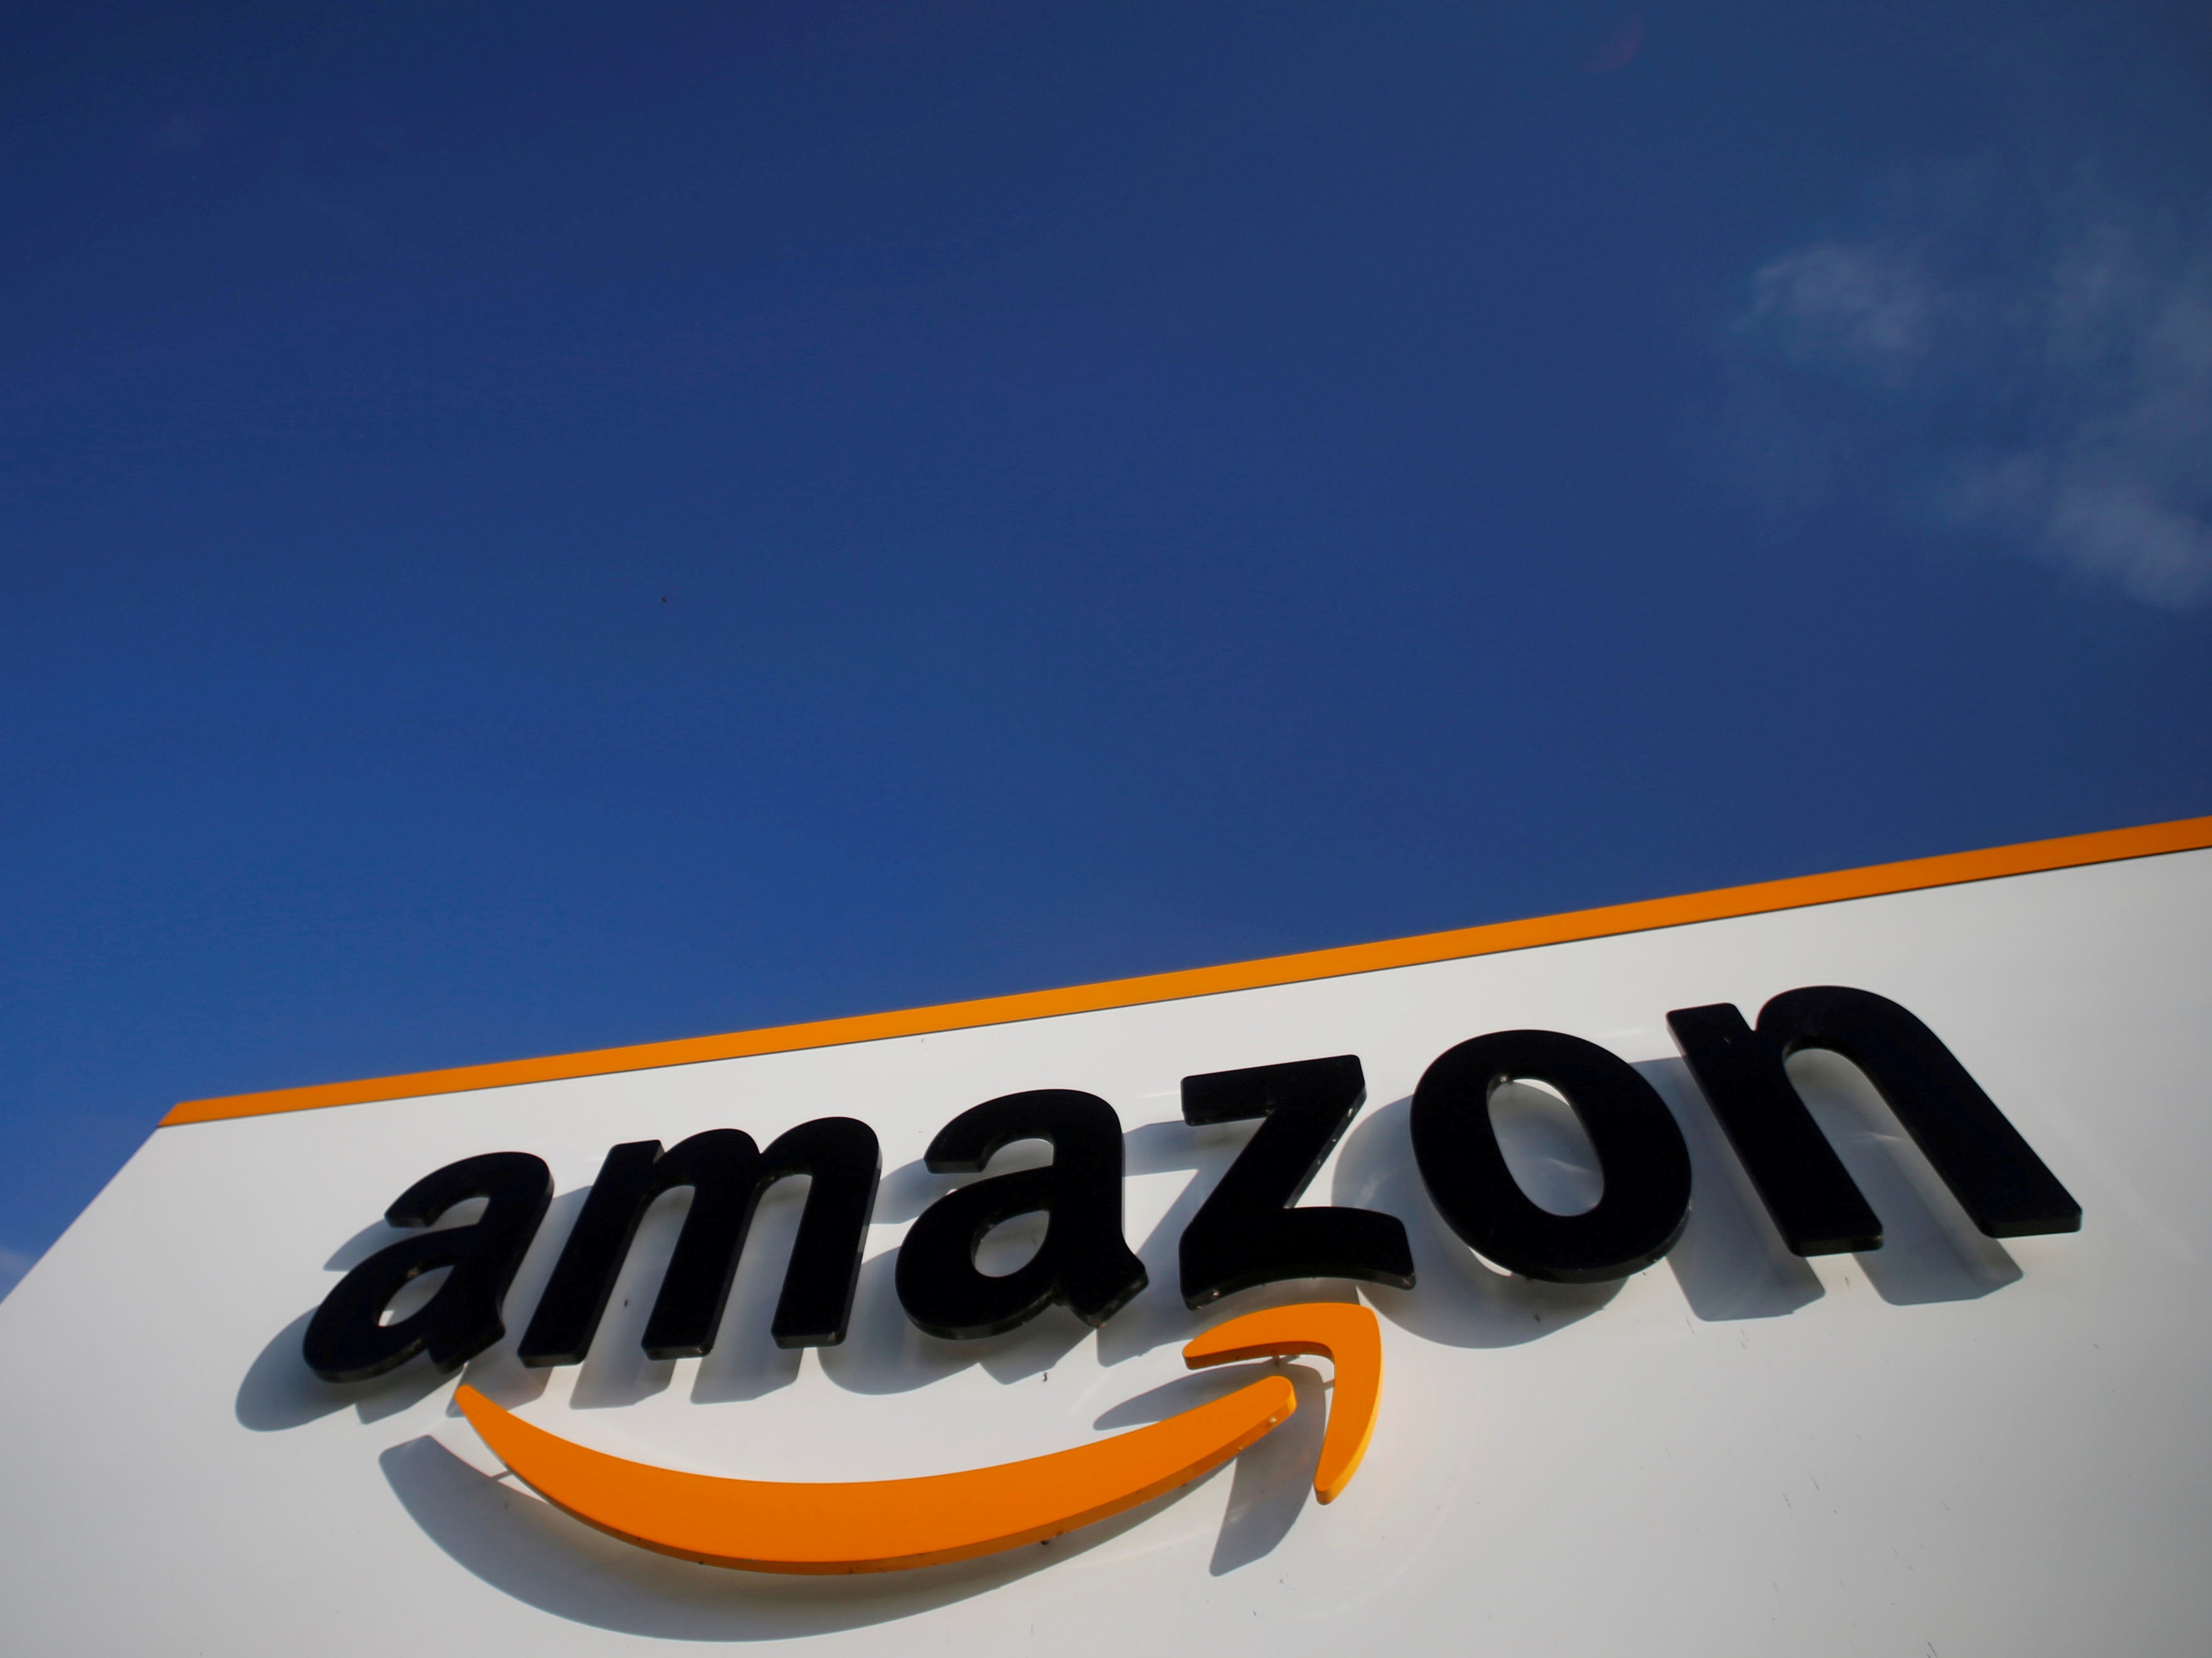 Call for online sales levy comes after Amazon reveals UK sales had rocketed by 51 per cent to £19.3bn in 2020